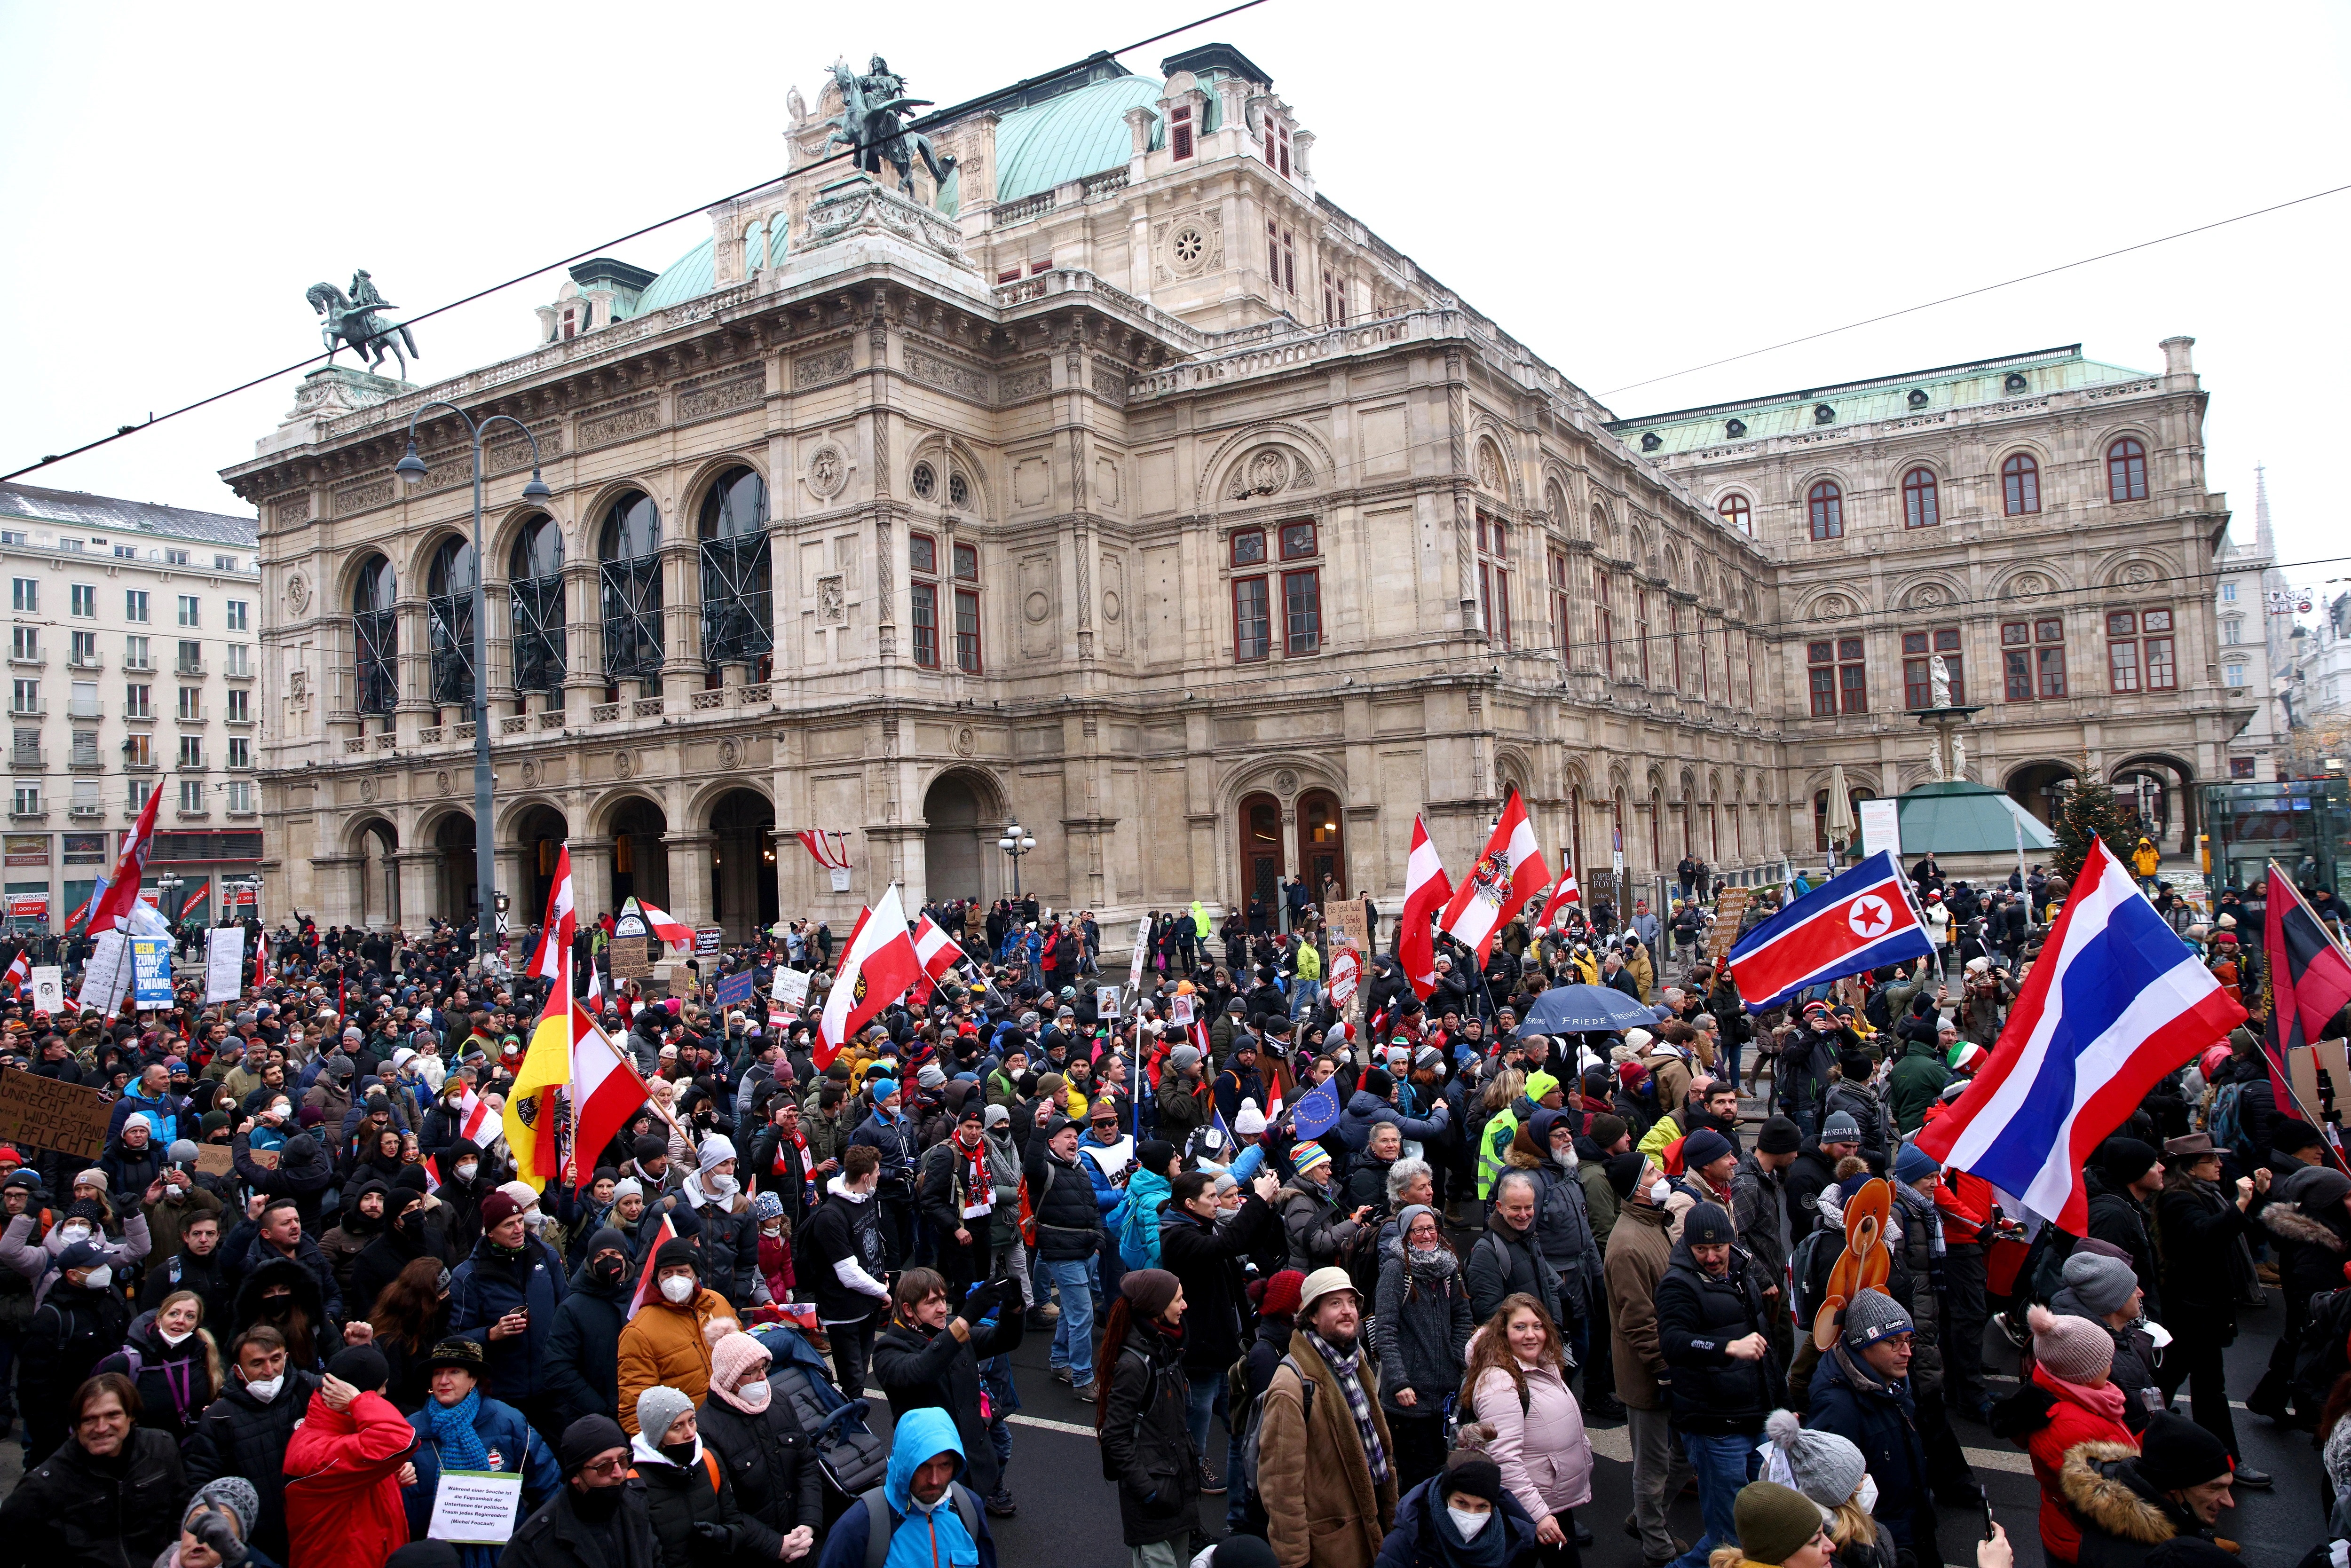 Tens of thousands of people have rallied in Vienna in protest against restrictions introduced to halt the spread of coronavirus in Austria, including mandatory COVID-19 vaccines and home confinement orders for the unvaccinated. About 1,400 police officers were on duty on Saturday to oversee the protest, which attracted an estimated 44,000 people and followed a similar demonstration in the Austrian capital last week. Police said three people were arrested for offences including the use of fireworks and disregarding the requirement to wear masks. Journalists covering the event, which began in Heldenplatz square, were attacked with snowballs and ice, and one reporter was the victim of an attempted assault, police said.